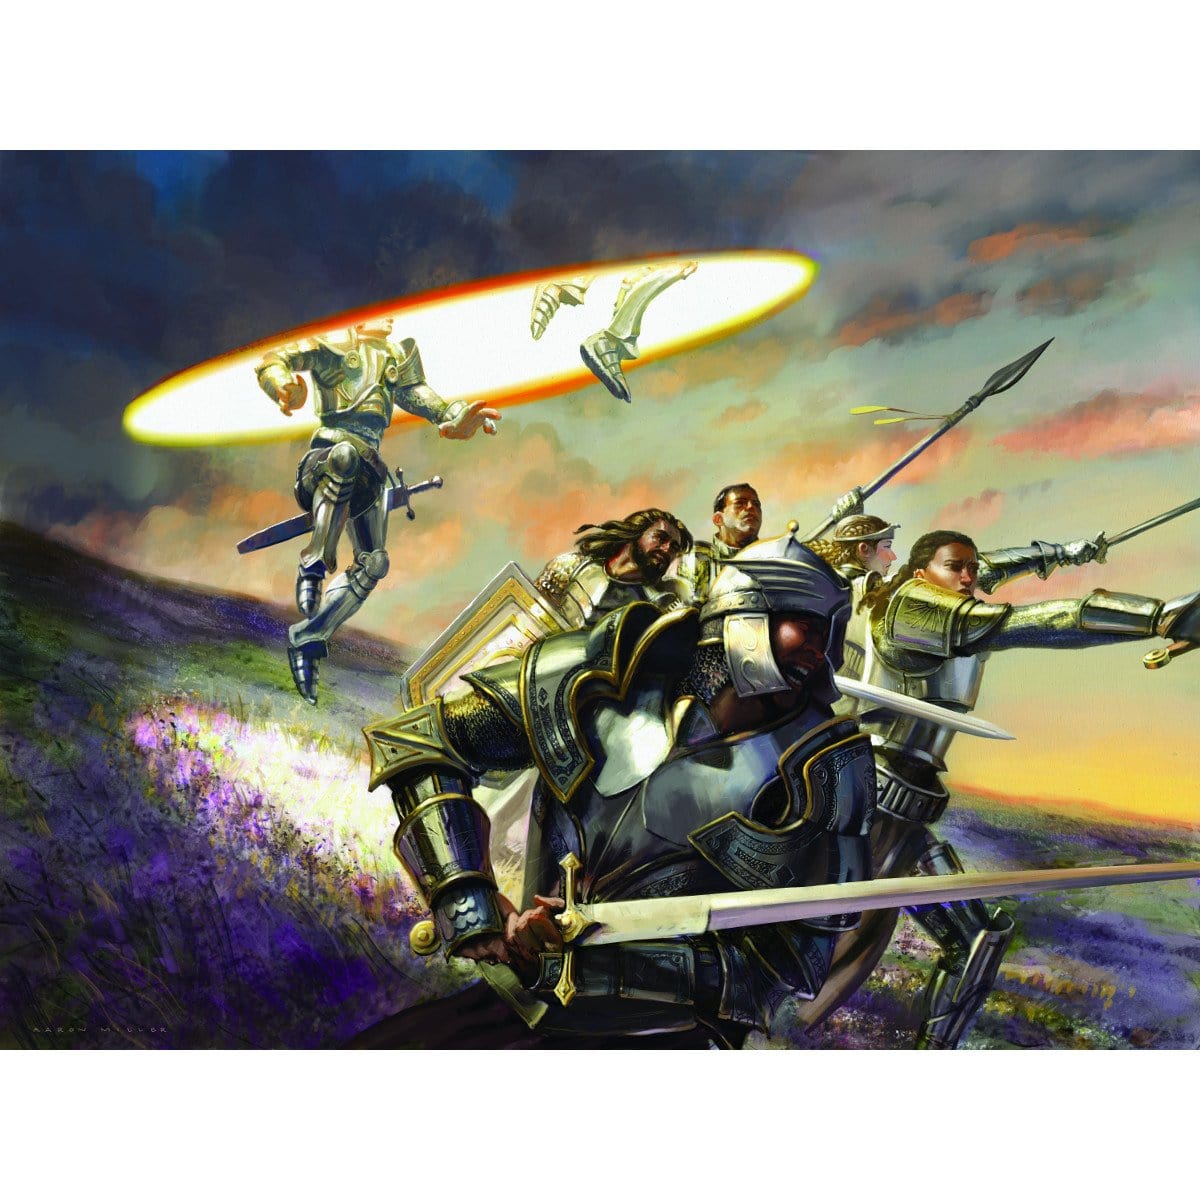 Deploy to the Front Print - Print - Original Magic Art - Accessories for Magic the Gathering and other card games